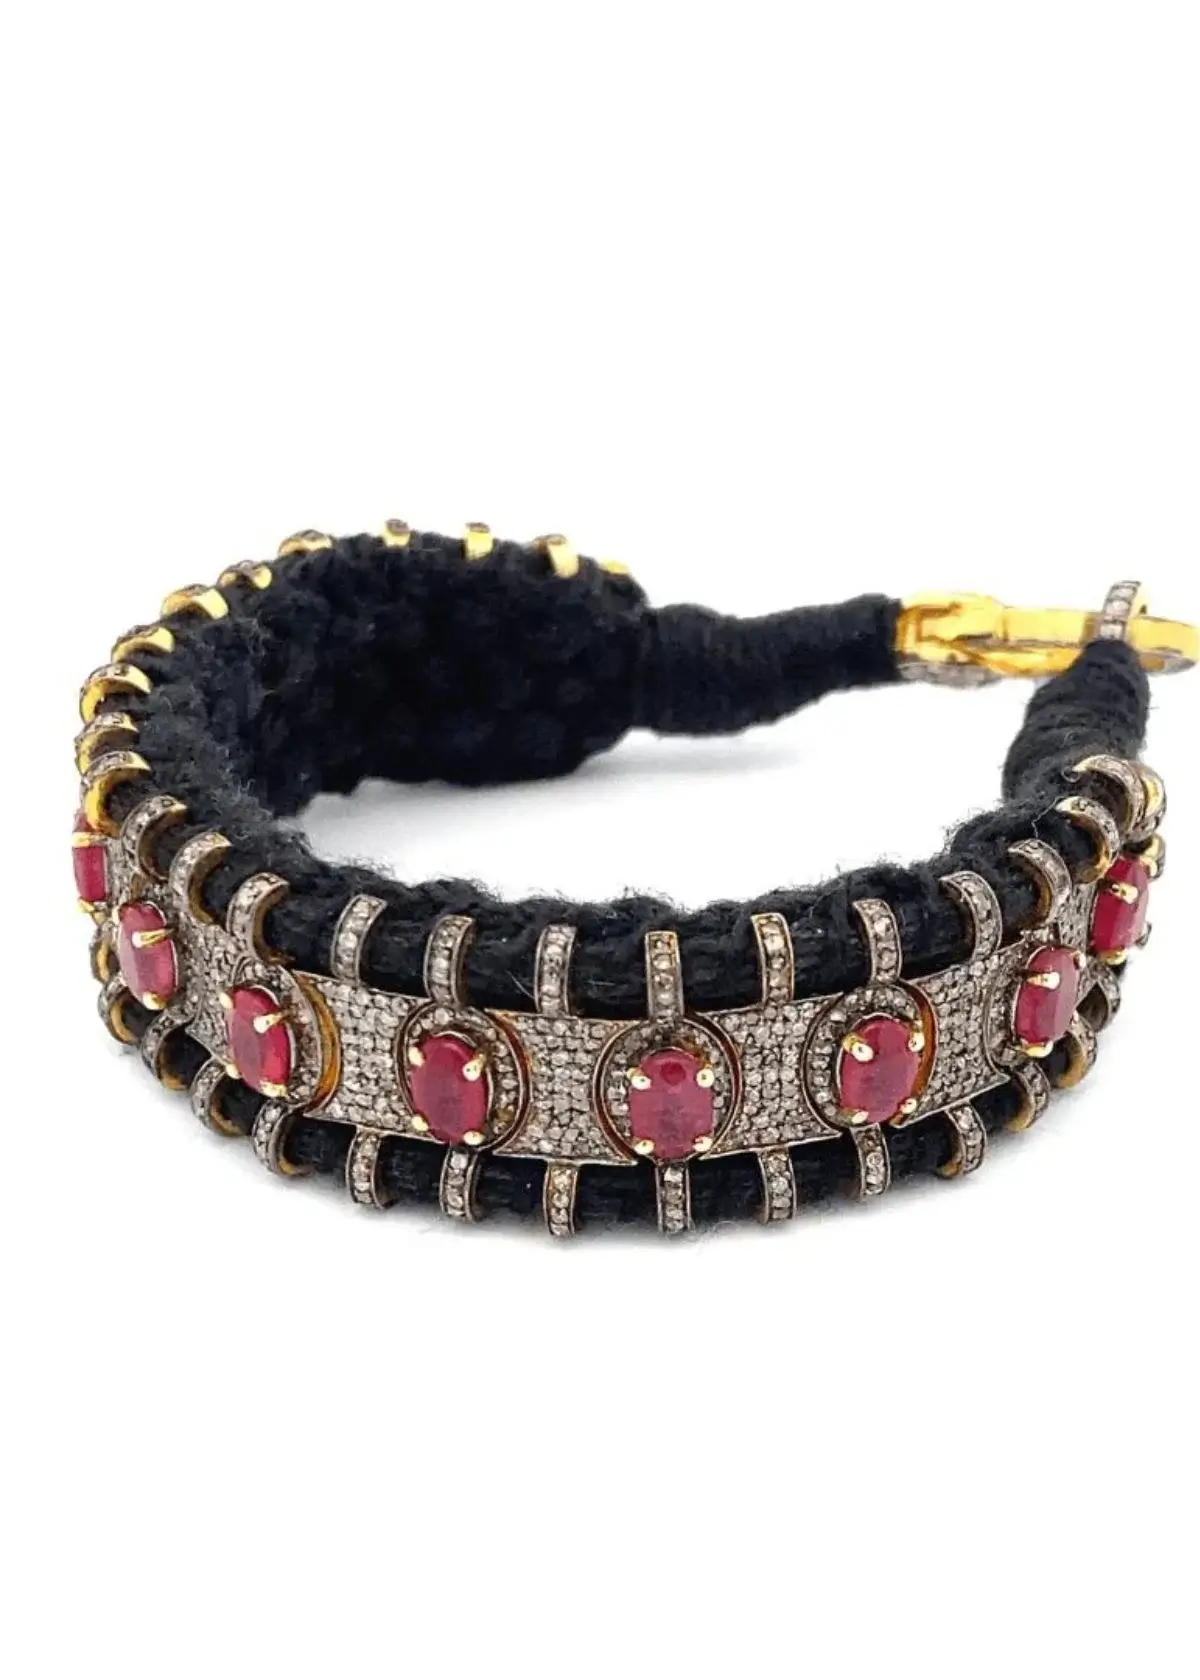 What does a ruby bracelet symbolize in men's jewelry?